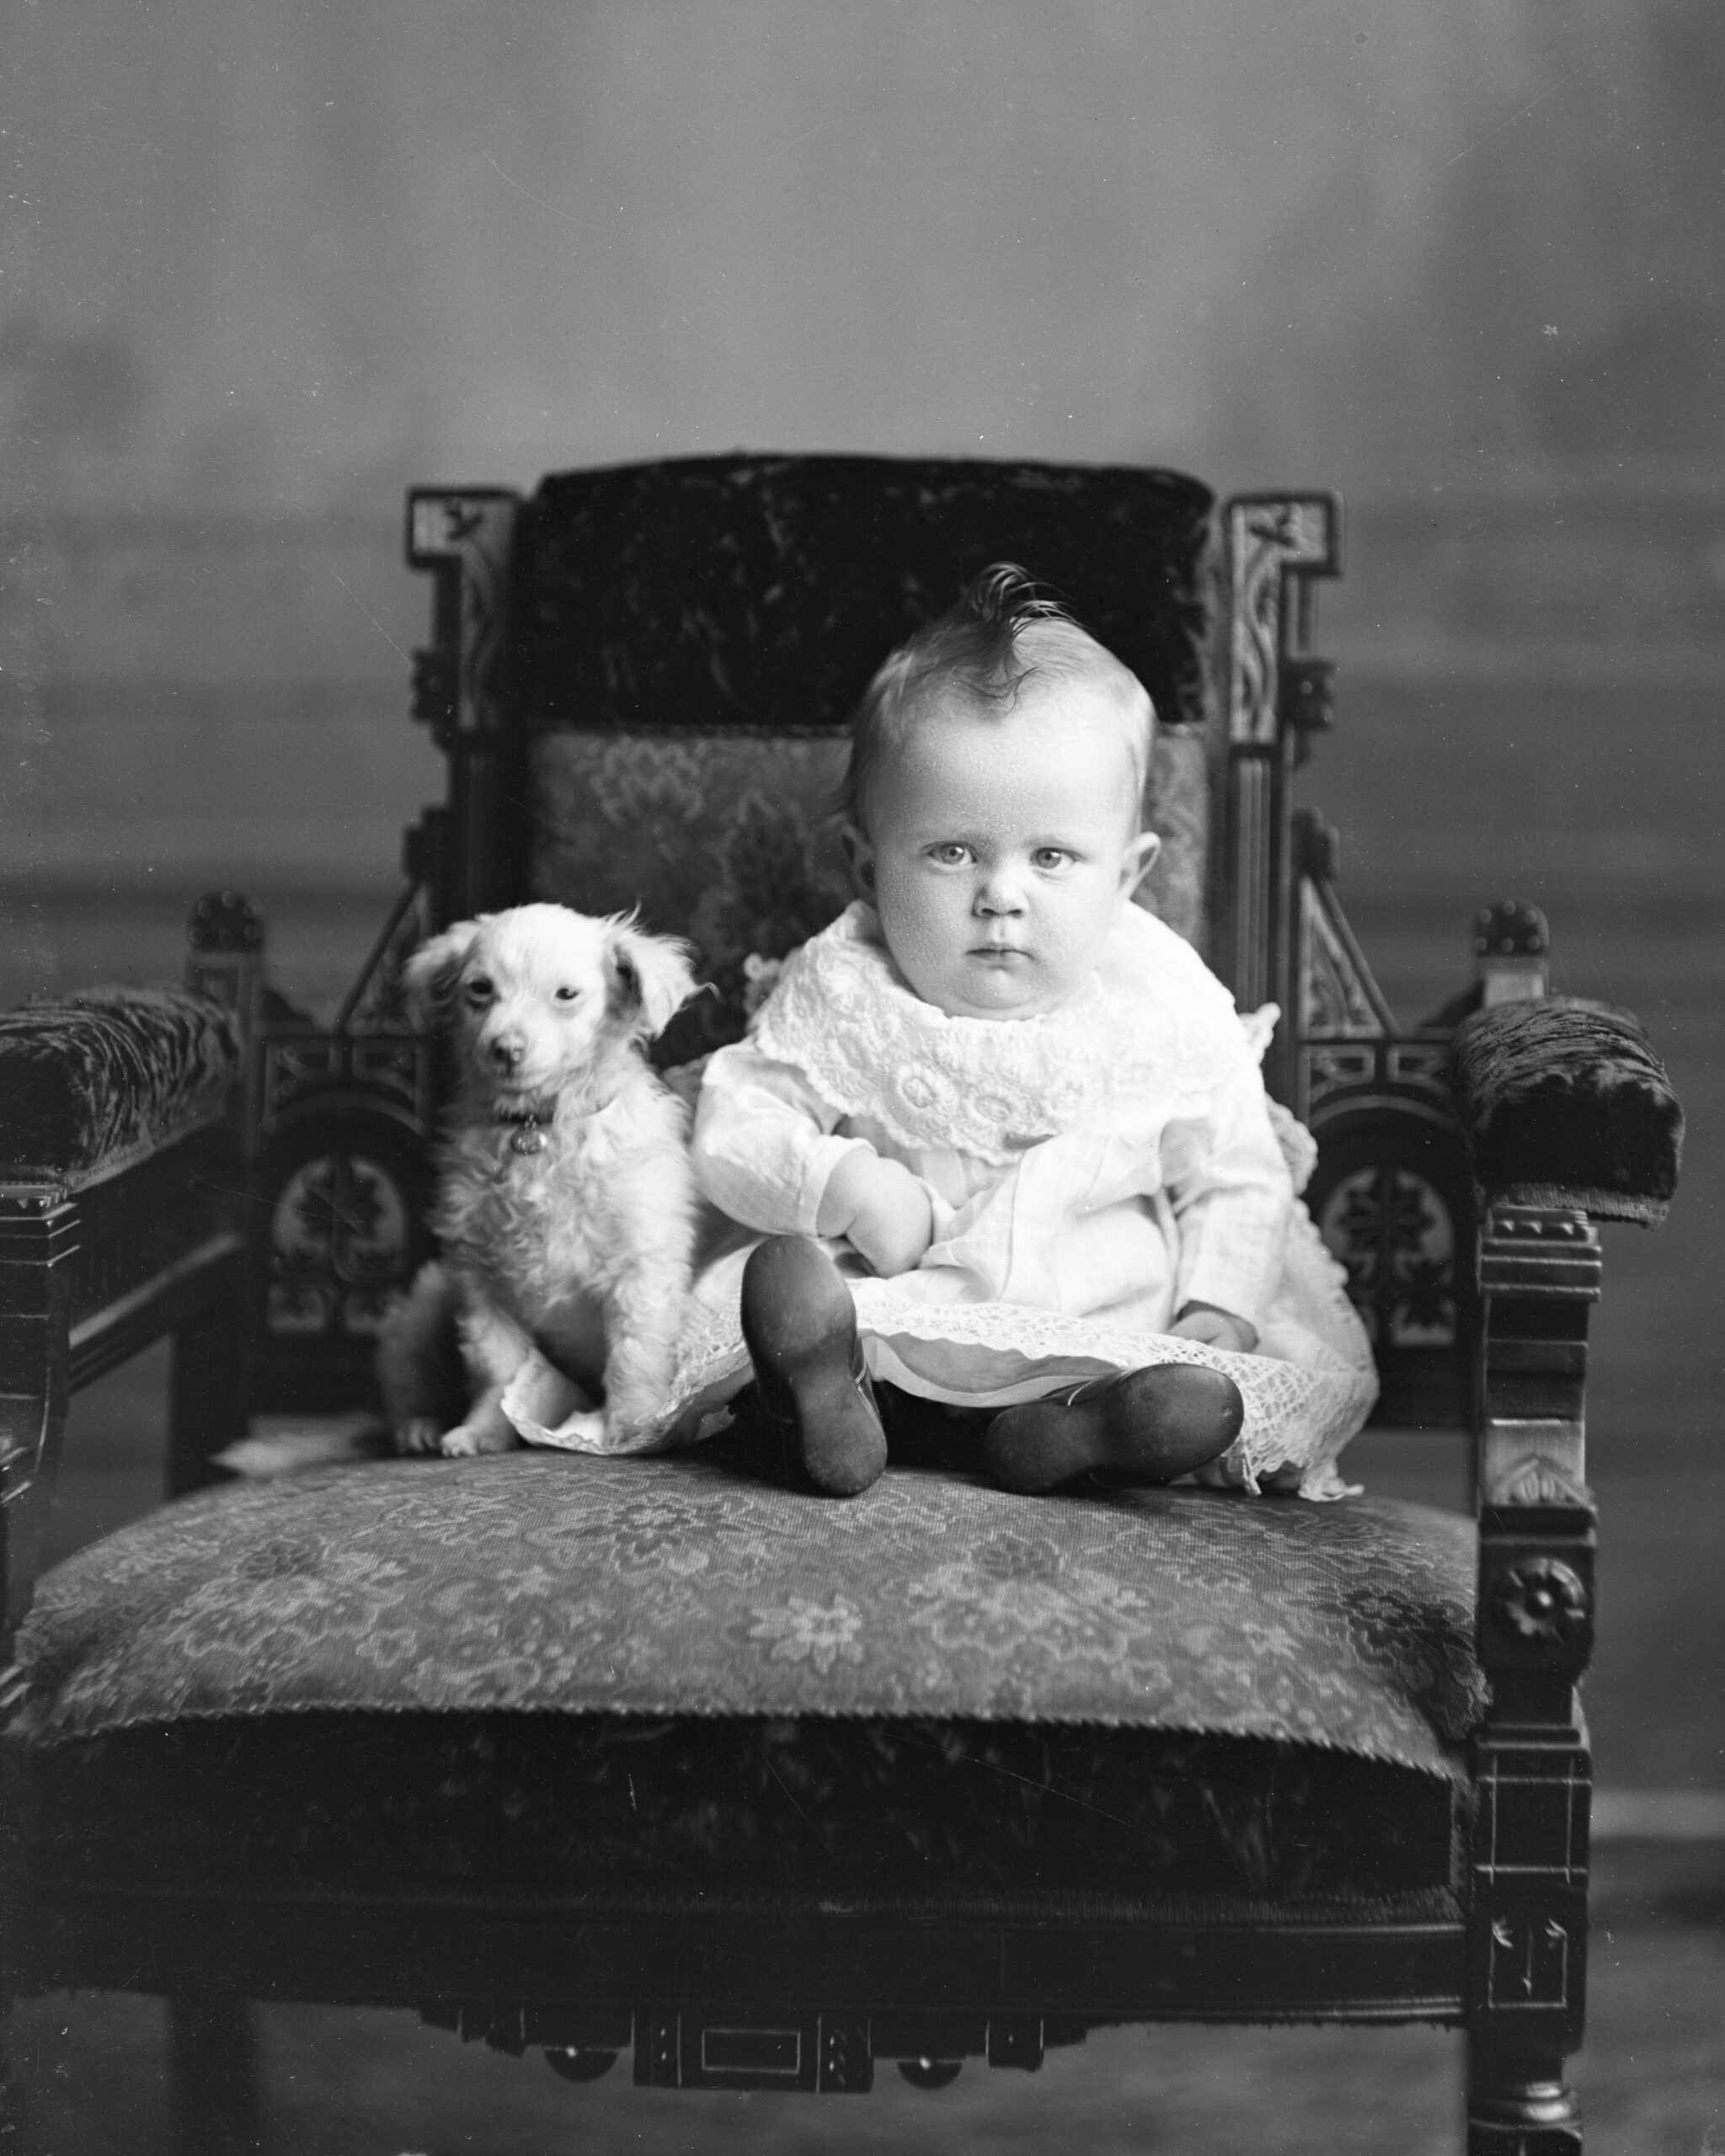 A baby and a dog posing on a chair.